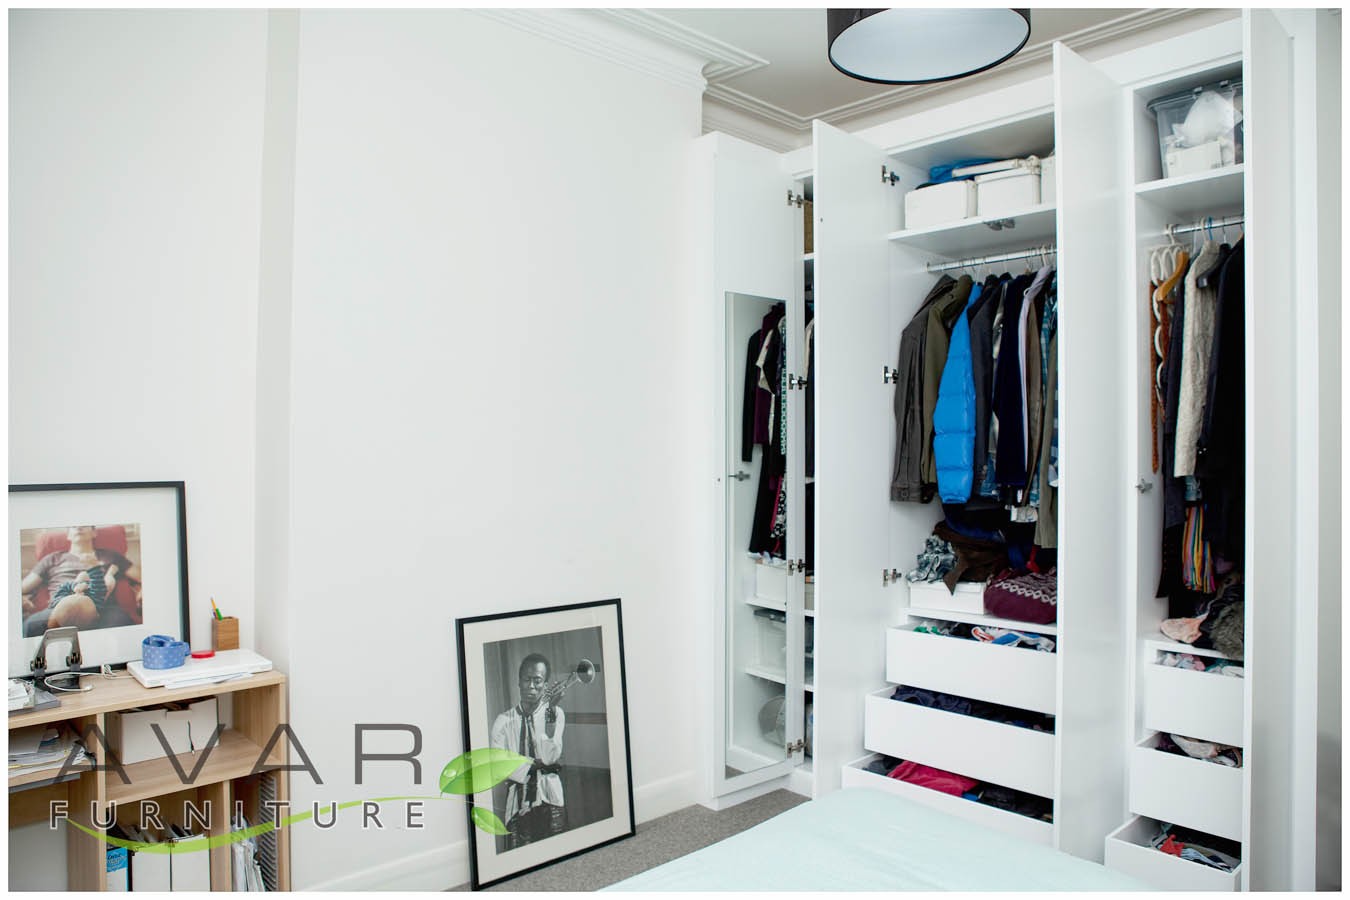  Fitted wardrobe ideas Gallery 13 | North London, UK | Avar Furniture